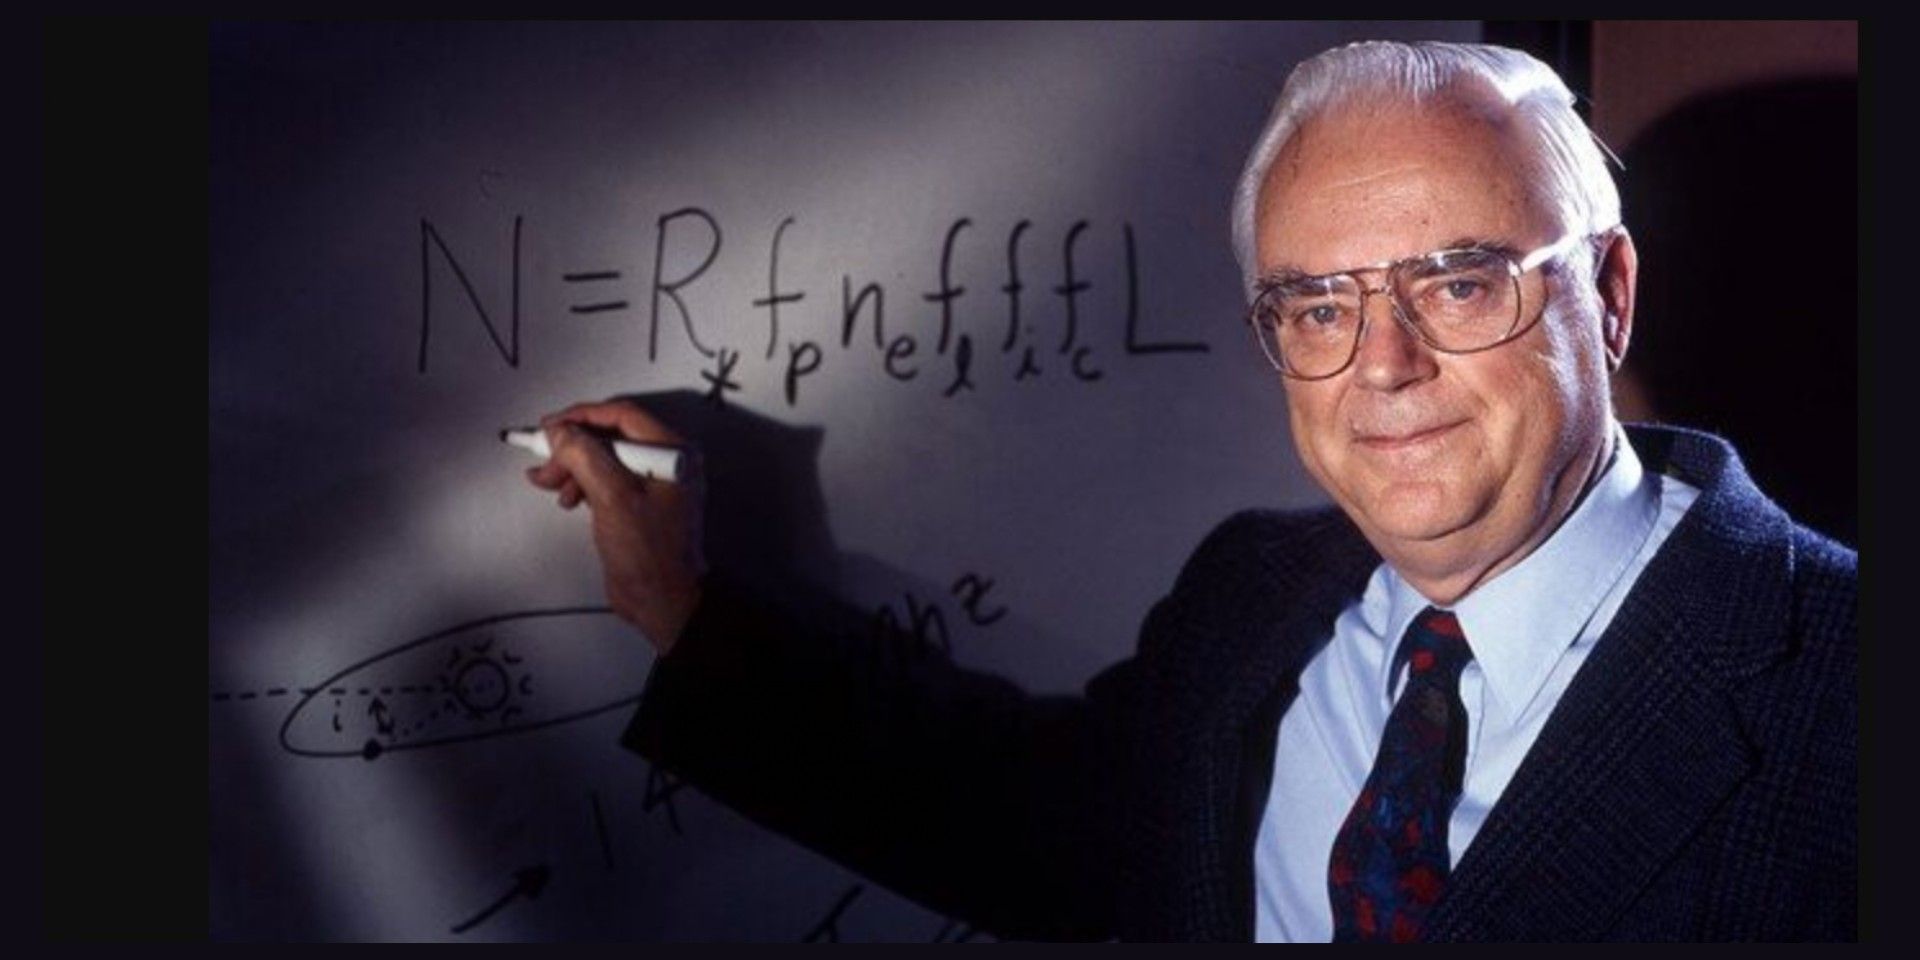 A Look At The Pioneering Alien Researcher’s Legacy, The Drake Equation